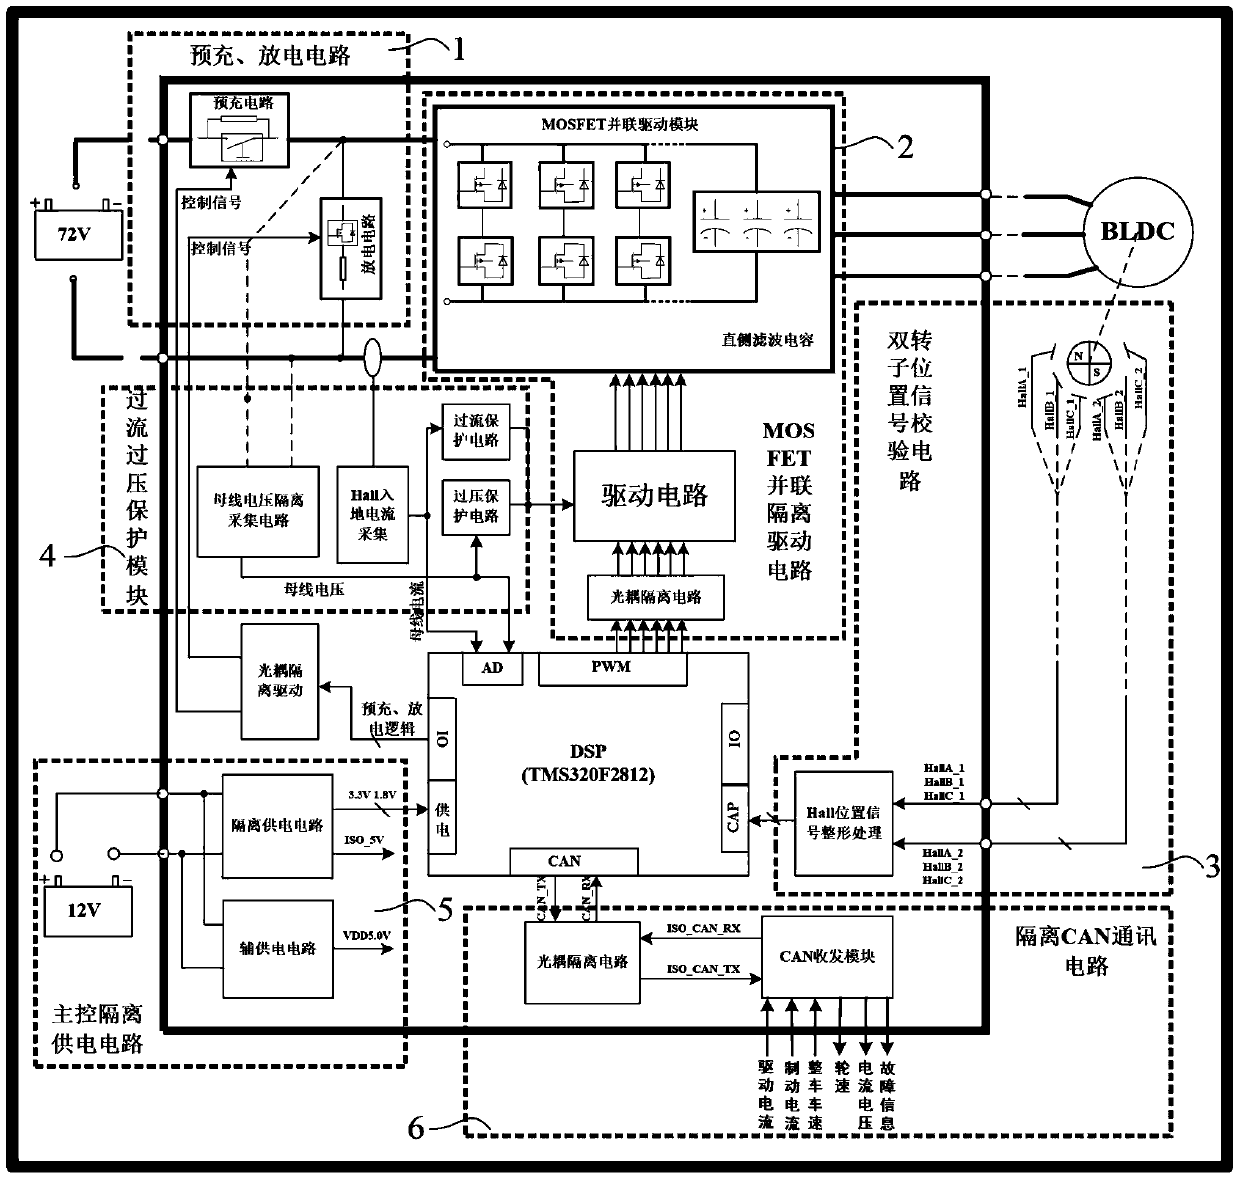 A pure electric vehicle motor controller with compound regenerative braking function